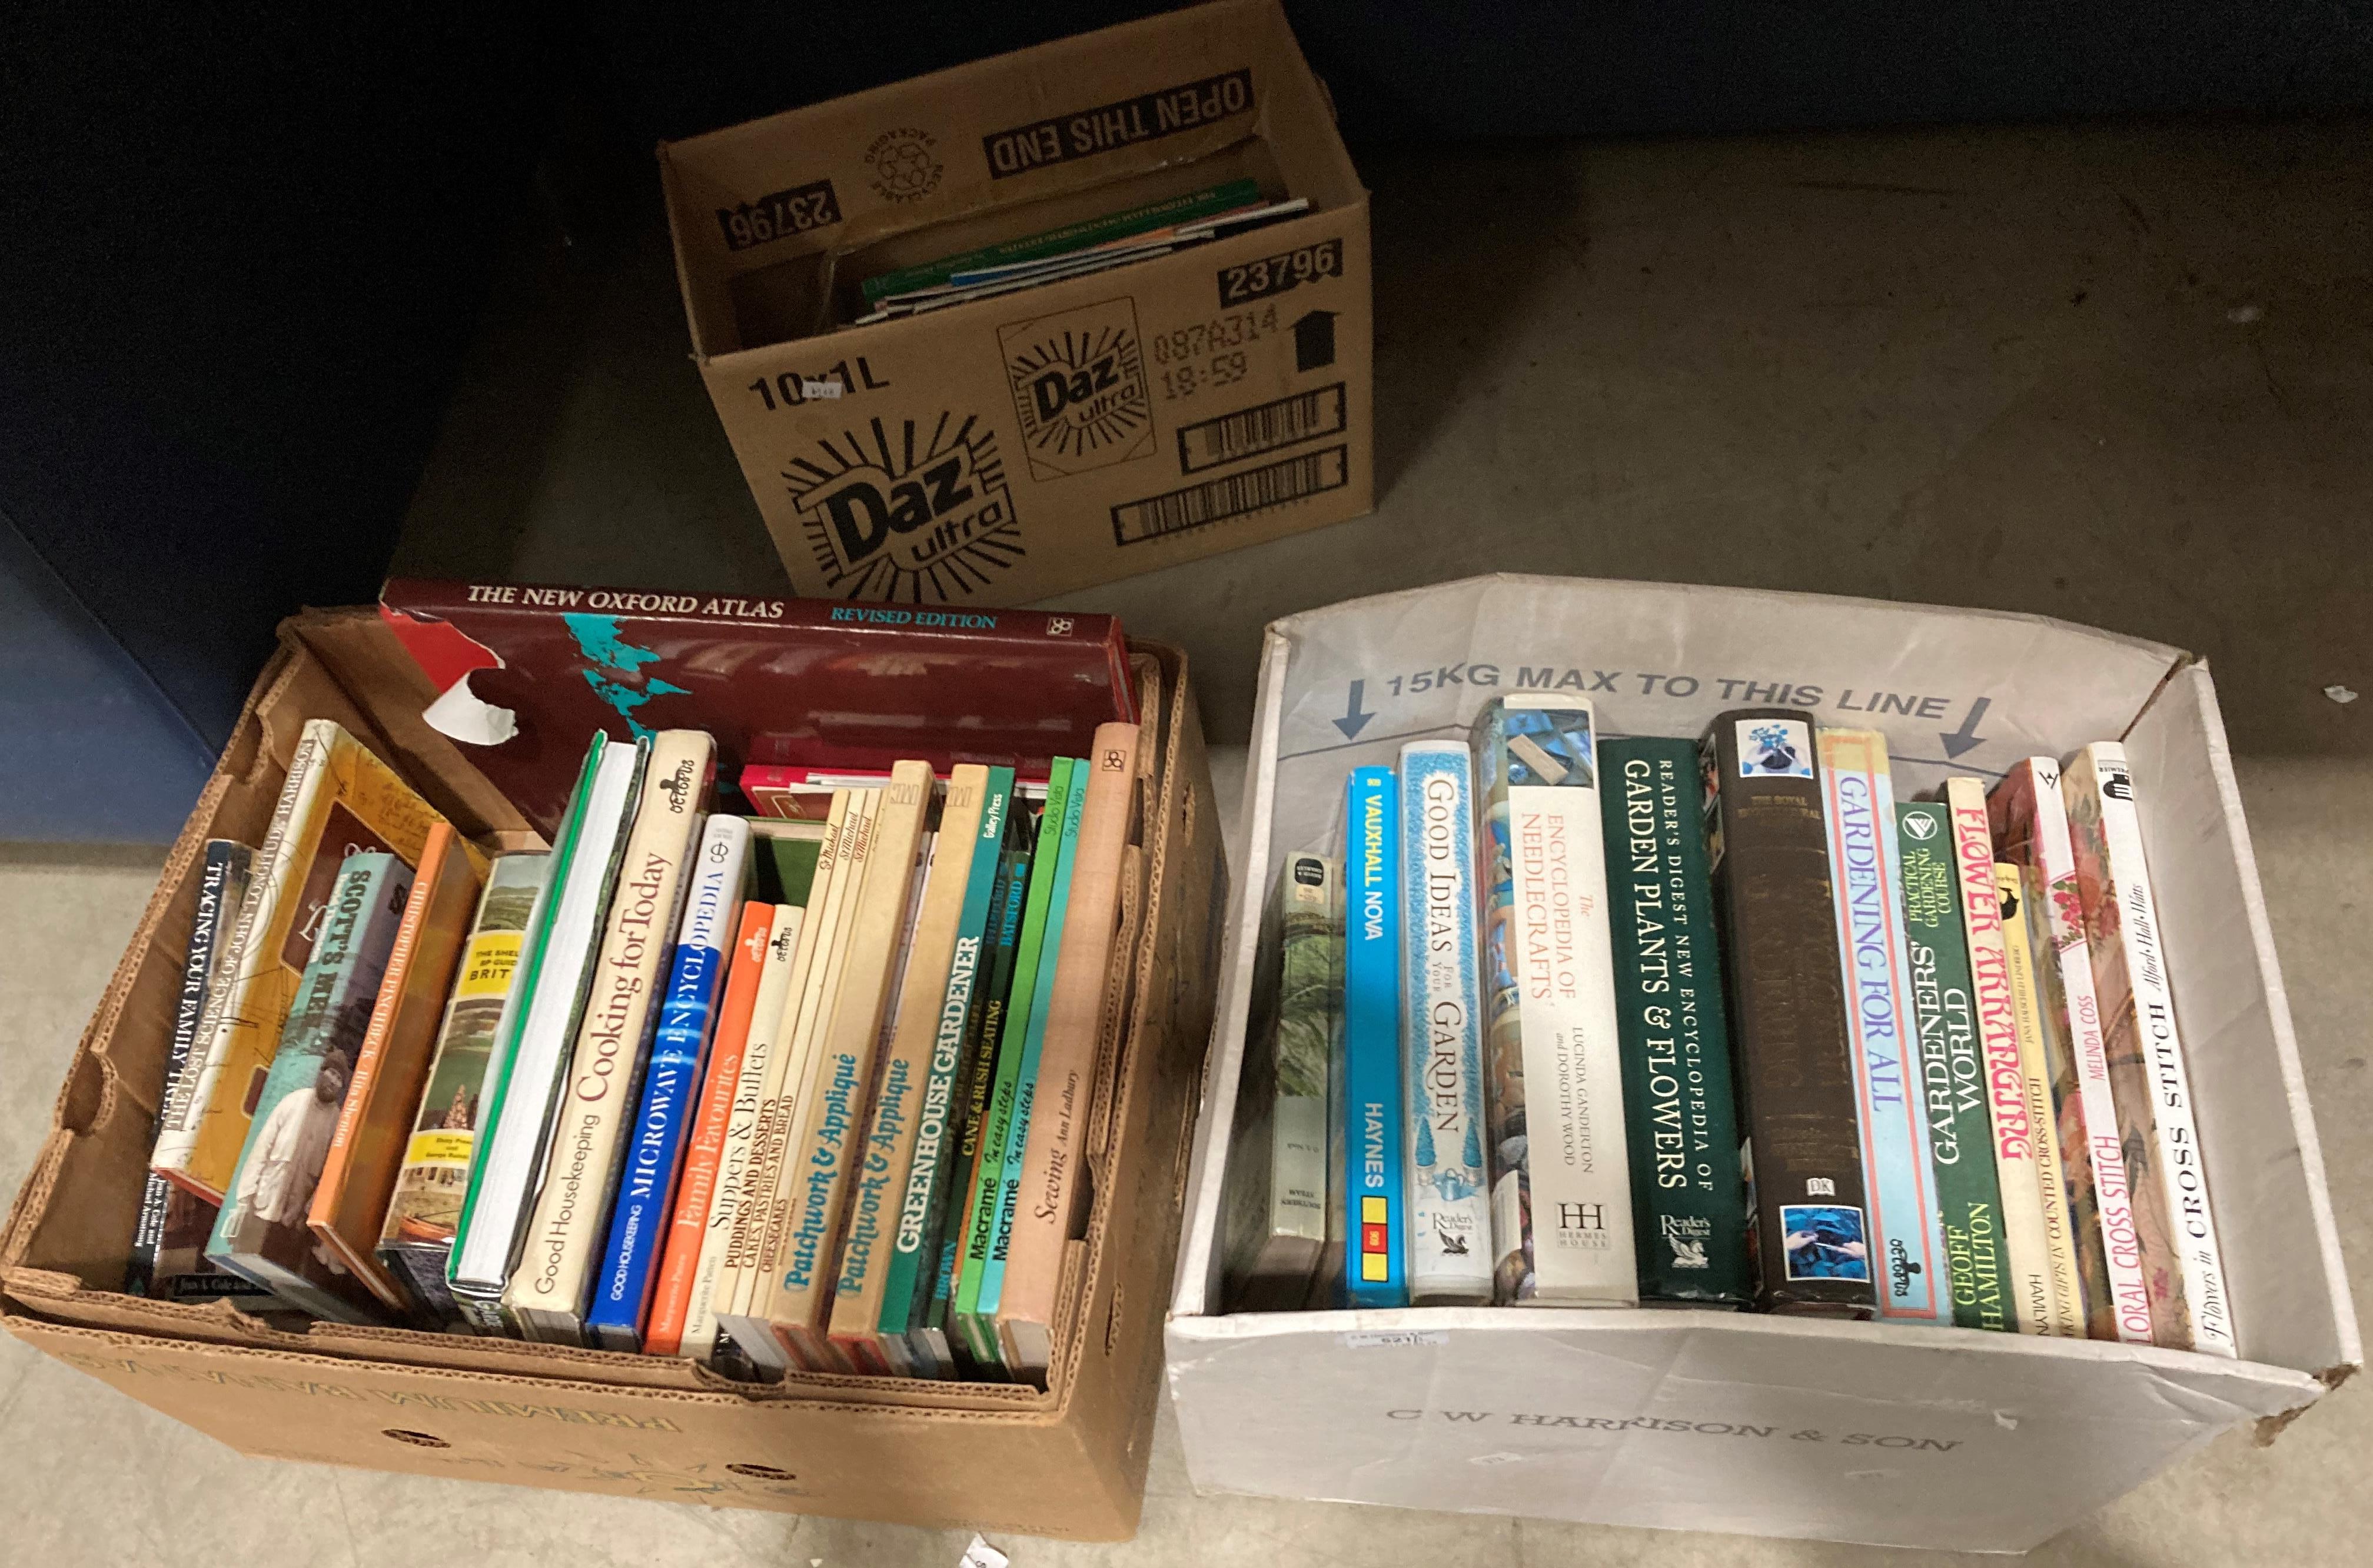 Contents to two crates - approximately 36 books on gardening and other crafts, etc.